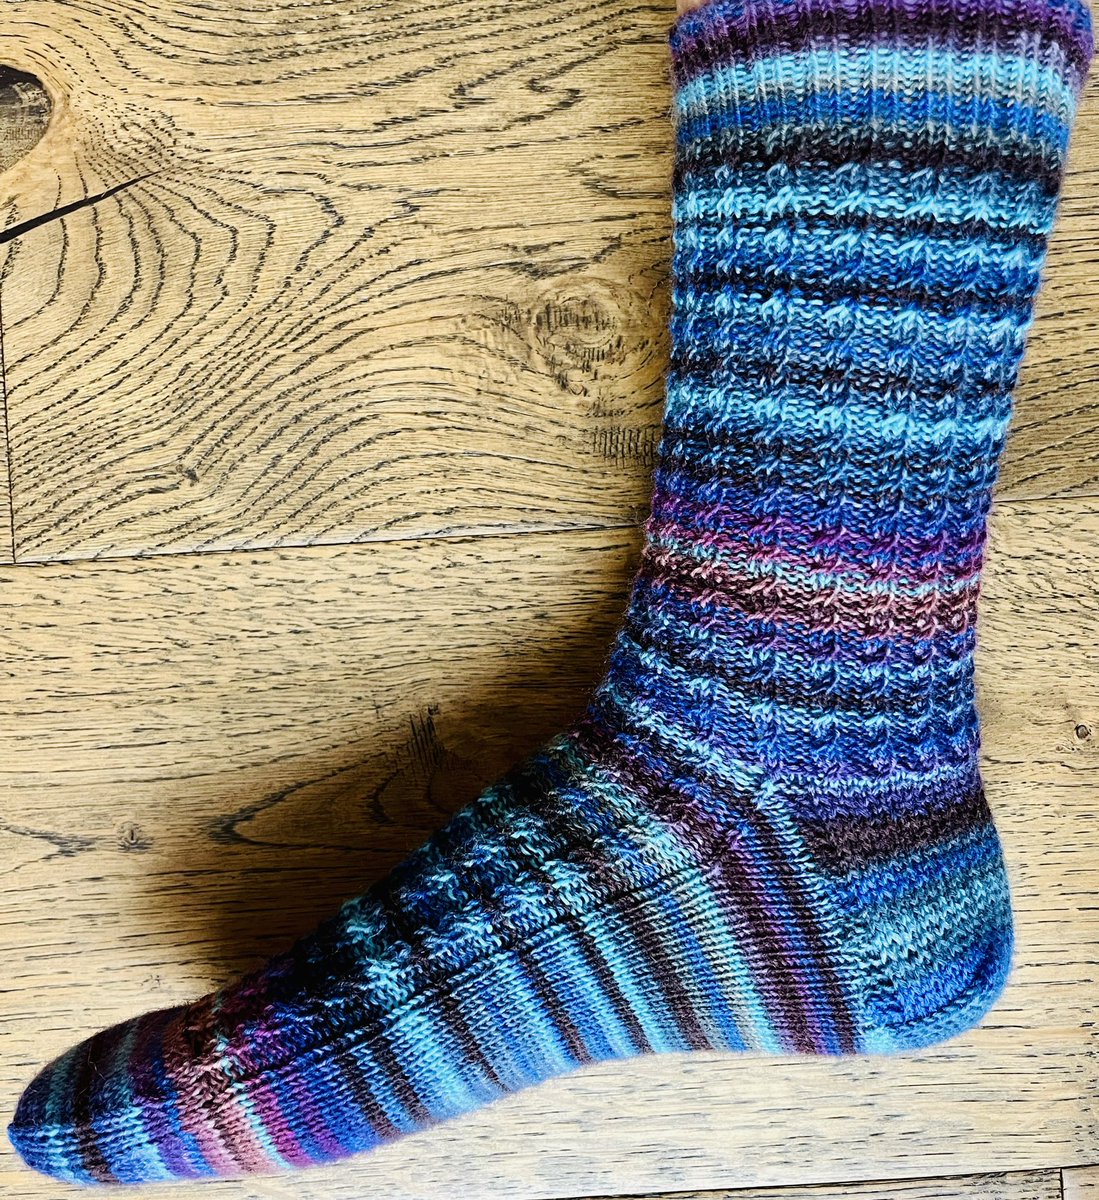 Hot off the needles! 
Pattern - Calle Cables (Ravelry) 
Yarn - Lang Super Soxx - Capital Cities 2
Colour - Reykjavik
Pattern Revisions - 2.25mm needles, 72 sts; crochet cast on cuff; twisted rib cuff; garter stitch ribbed, eye of partridge heel flap; Dutch heel turn; rounded toe